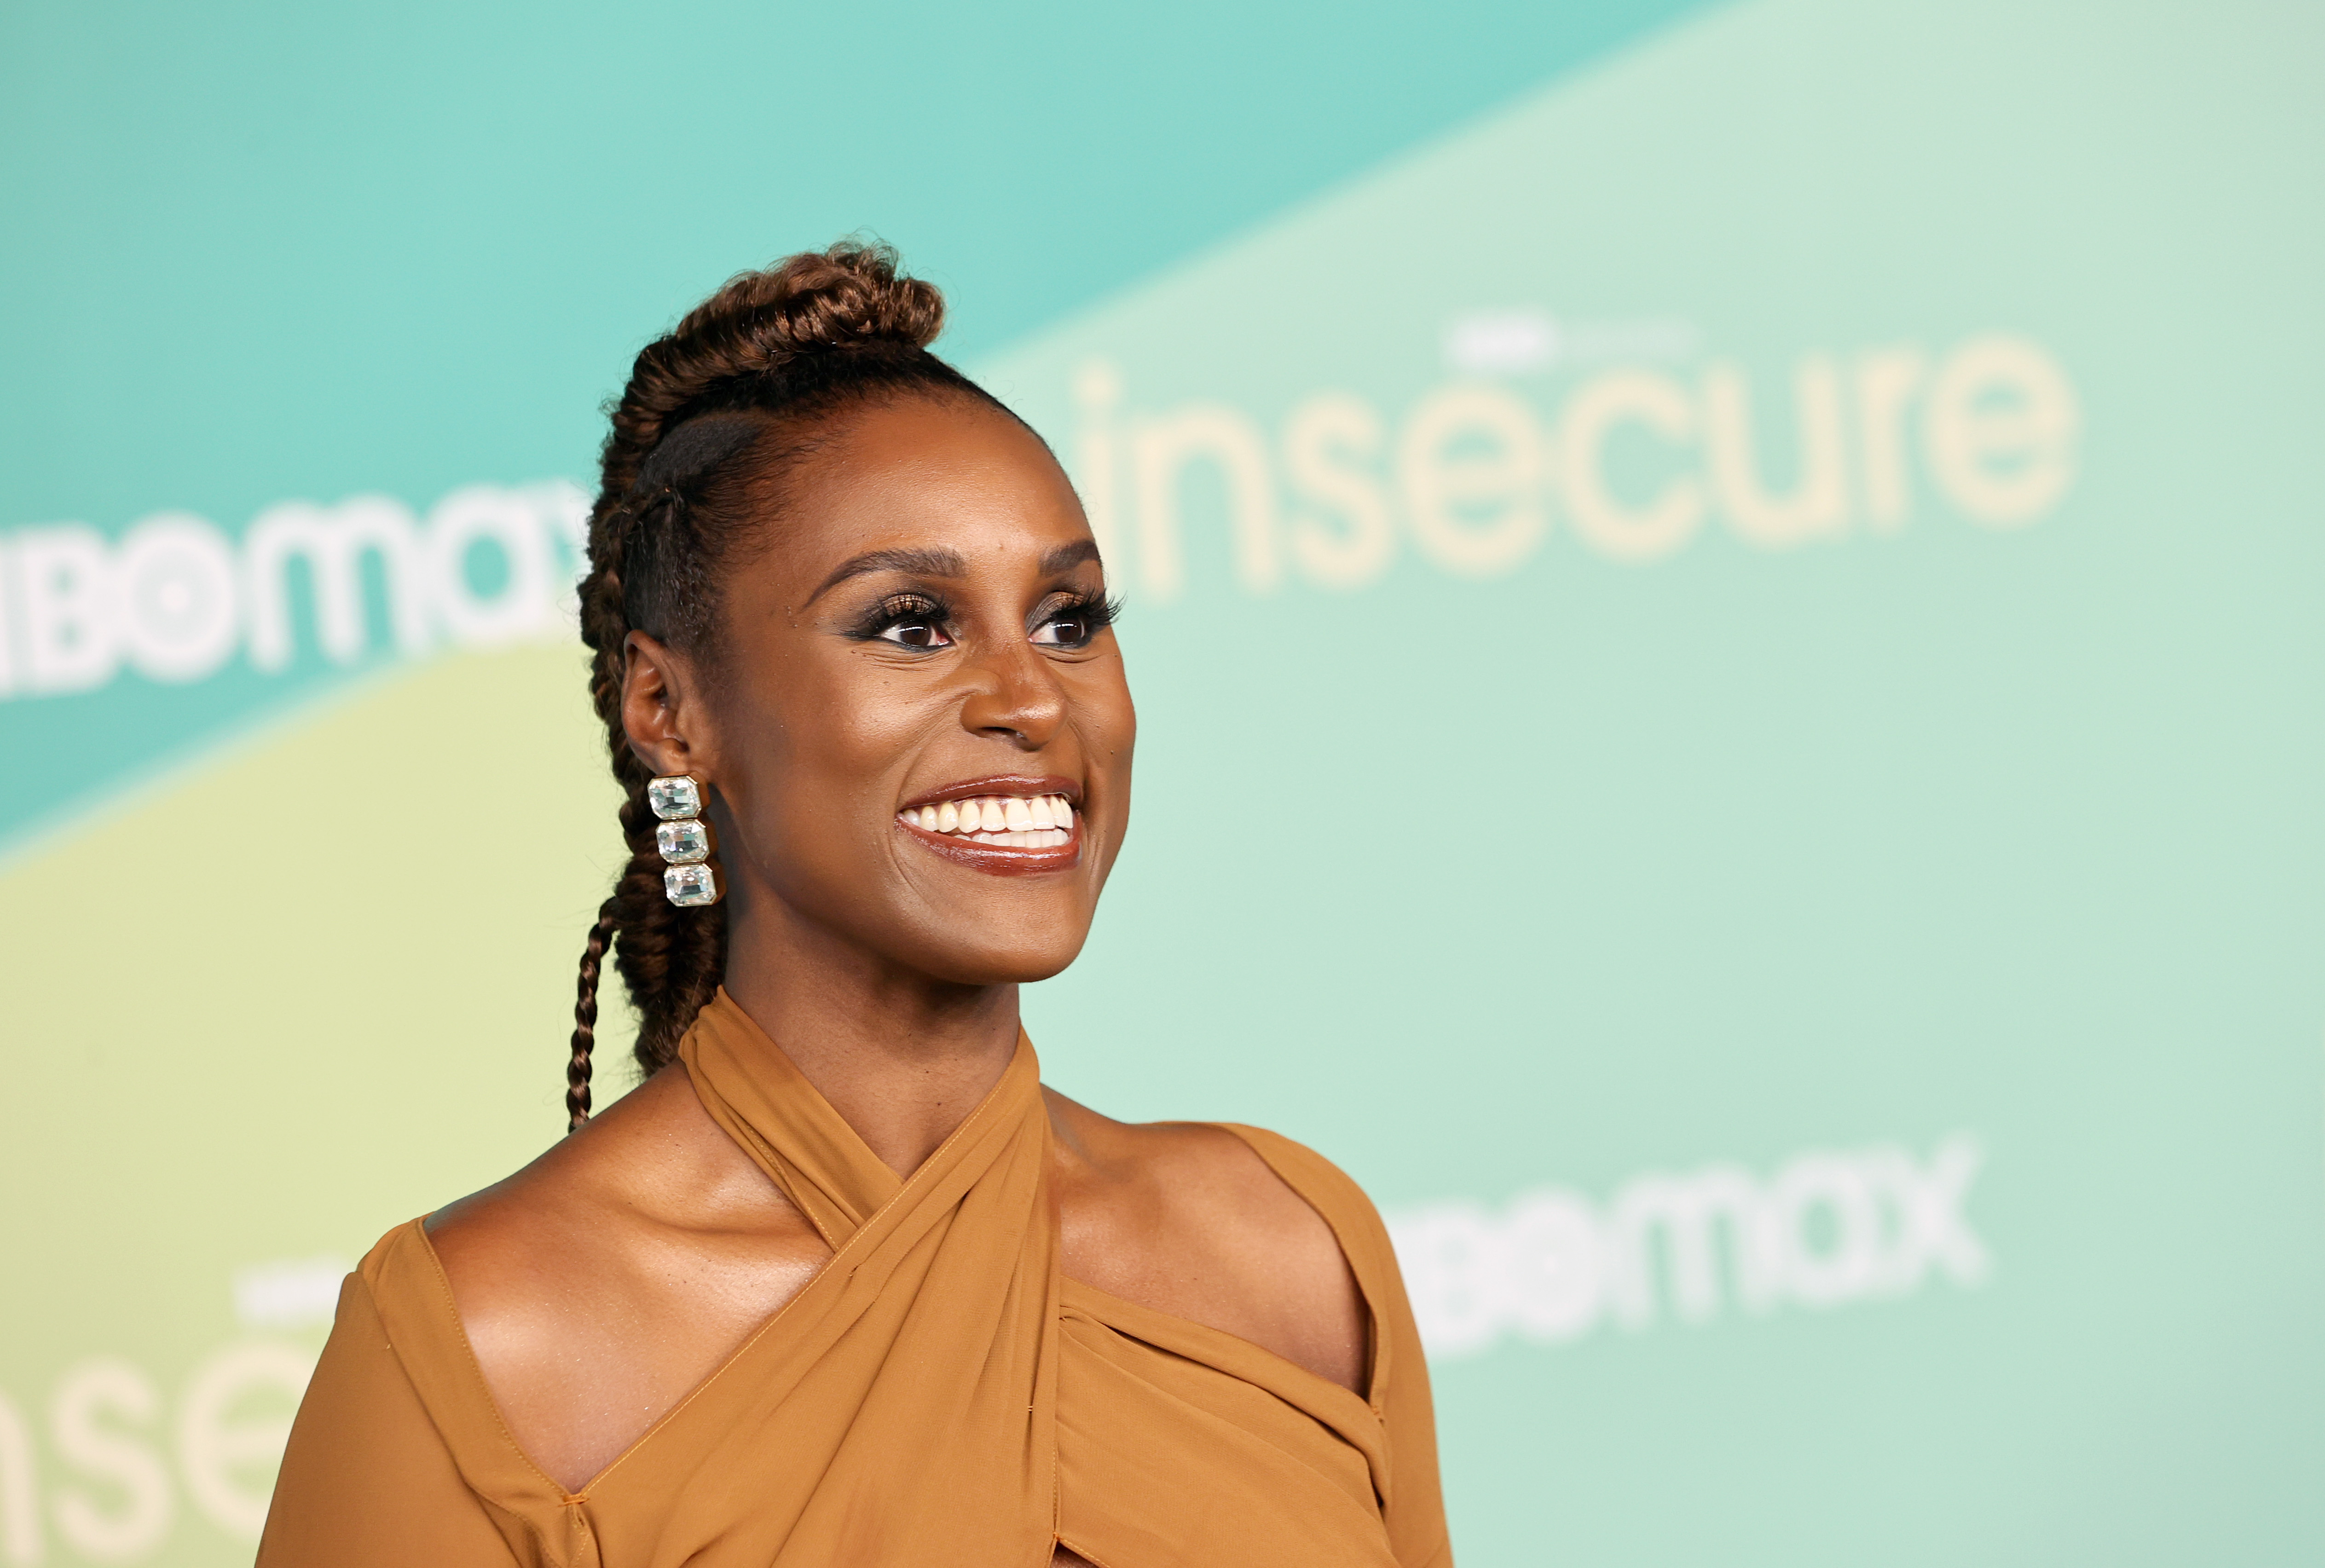 Issa Rae On Which Artists Helped Write Songs For “Rap Sh!t”